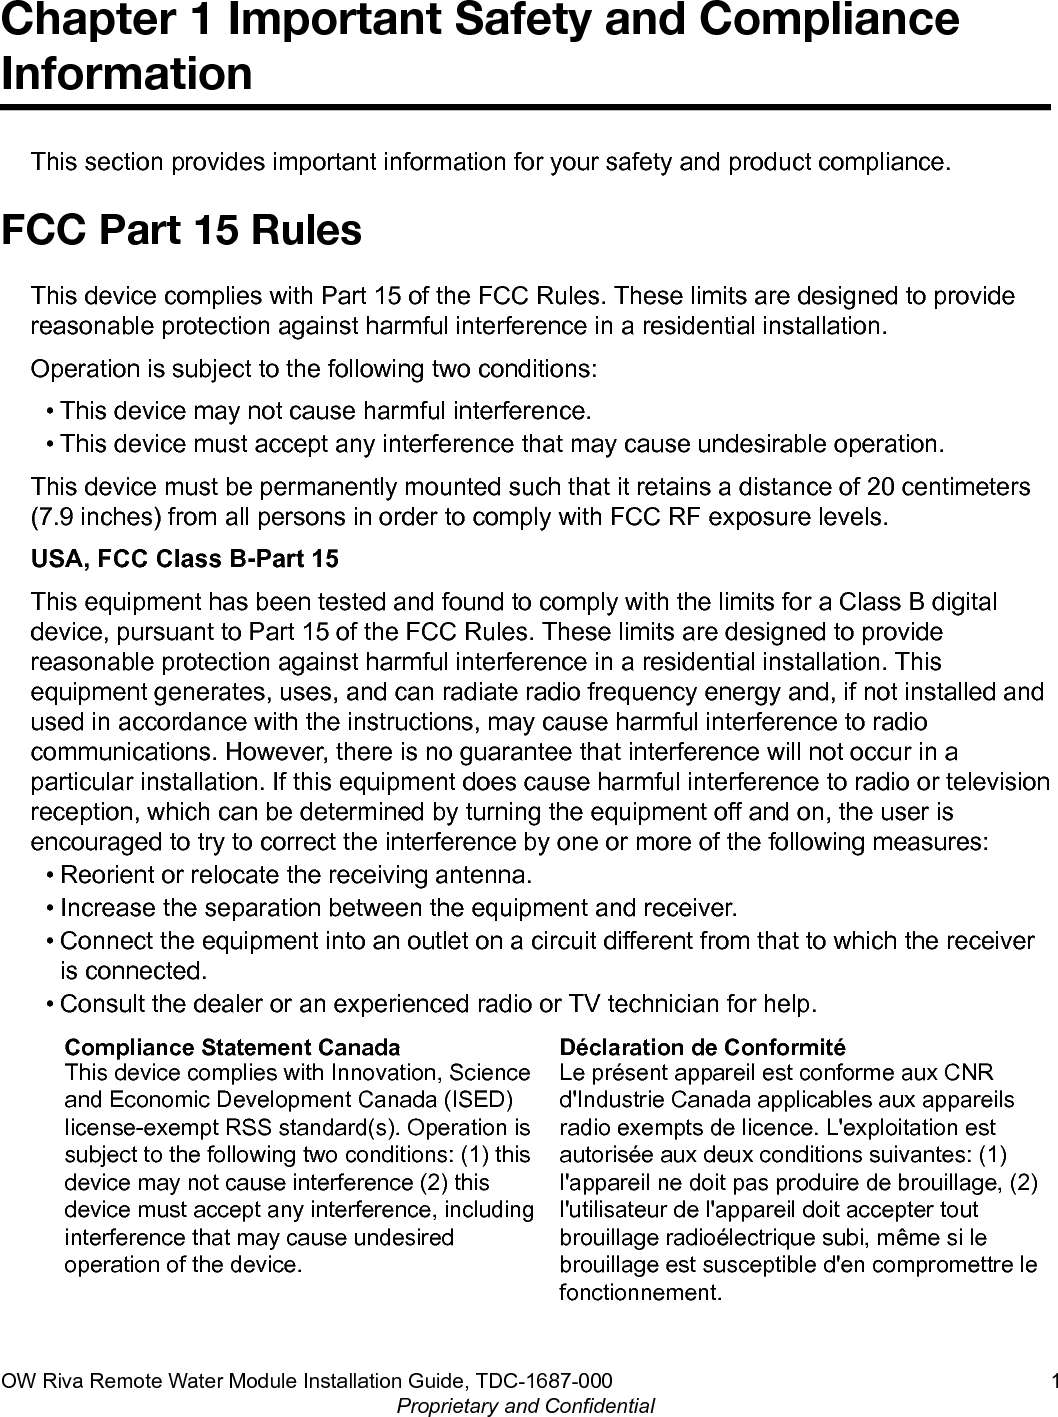 Chapter 1 Important Safety and ComplianceInformationThis section provides important information for your safety and product compliance.FCC Part 15 RulesThis device complies with Part 15 of the FCC Rules. These limits are designed to providereasonable protection against harmful interference in a residential installation.Operation is subject to the following two conditions:• This device may not cause harmful interference.• This device must accept any interference that may cause undesirable operation.This device must be permanently mounted such that it retains a distance of 20 centimeters(7.9 inches) from all persons in order to comply with FCC RF exposure levels.USA, FCC Class B-Part 15This equipment has been tested and found to comply with the limits for a Class B digitaldevice, pursuant to Part 15 of the FCC Rules. These limits are designed to providereasonable protection against harmful interference in a residential installation. Thisequipment generates, uses, and can radiate radio frequency energy and, if not installed andused in accordance with the instructions, may cause harmful interference to radiocommunications. However, there is no guarantee that interference will not occur in aparticular installation. If this equipment does cause harmful interference to radio or televisionreception, which can be determined by turning the equipment off and on, the user isencouraged to try to correct the interference by one or more of the following measures:• Reorient or relocate the receiving antenna.• Increase the separation between the equipment and receiver.• Connect the equipment into an outlet on a circuit different from that to which the receiveris connected.• Consult the dealer or an experienced radio or TV technician for help.Compliance Statement CanadaThis device complies with Innovation, Scienceand Economic Development Canada (ISED)license-exempt RSS standard(s). Operation issubject to the following two conditions: (1) thisdevice may not cause interference (2) thisdevice must accept any interference, includinginterference that may cause undesiredoperation of the device.Déclaration de ConformitéLe présent appareil est conforme aux CNRd&apos;Industrie Canada applicables aux appareilsradio exempts de licence. L&apos;exploitation estautorisée aux deux conditions suivantes: (1)l&apos;appareil ne doit pas produire de brouillage, (2)l&apos;utilisateur de l&apos;appareil doit accepter toutbrouillage radioélectrique subi, même si lebrouillage est susceptible d&apos;en compromettre lefonctionnement.OW Riva Remote Water Module Installation Guide, TDC-1687-000 1Proprietary and Confidential